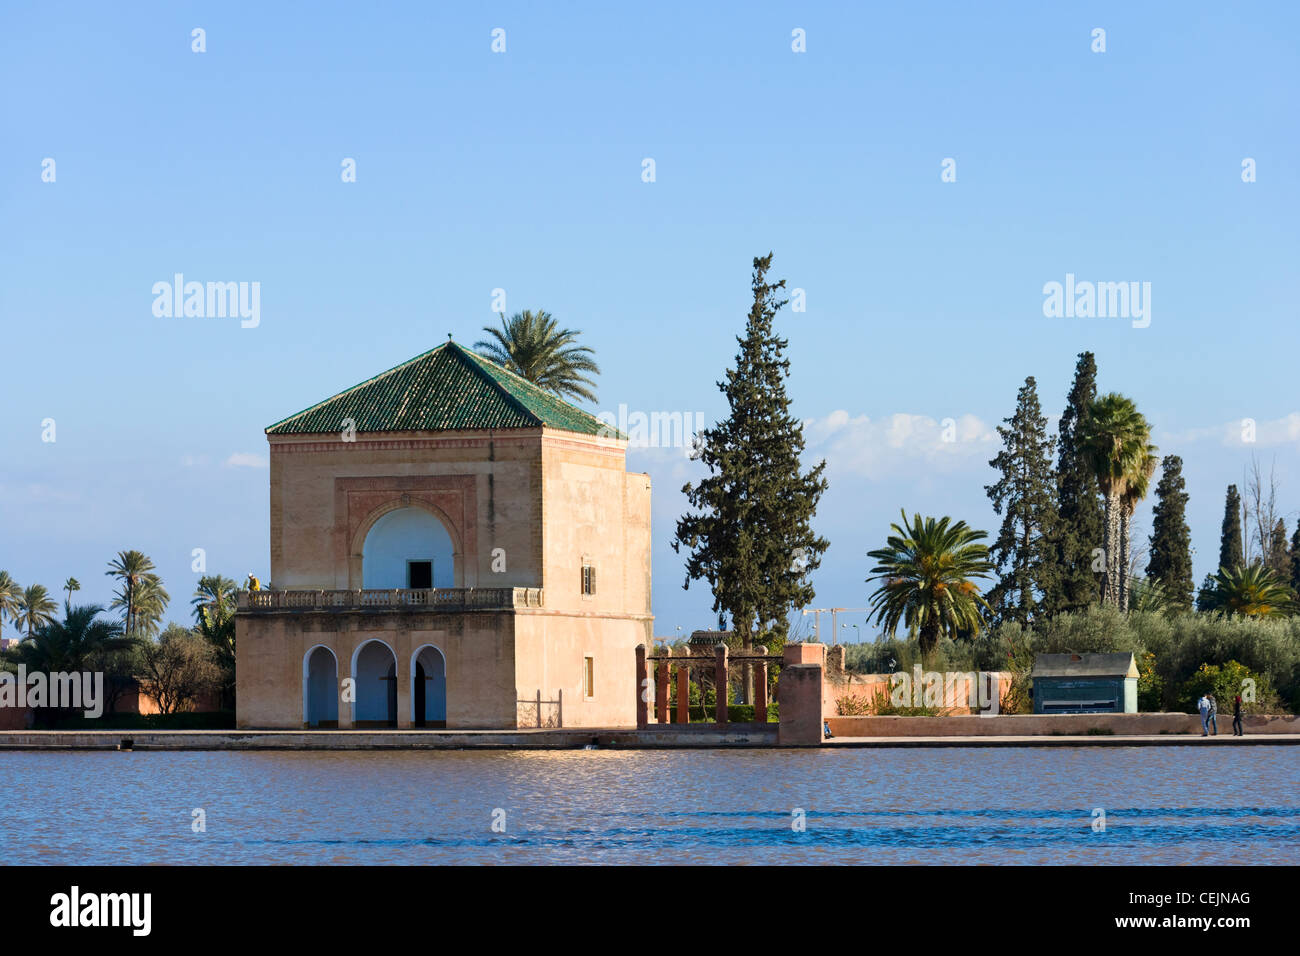 View of the pavilion and pool in the Menara Gardens, Marrakech, Morocco, North Africa Stock Photo